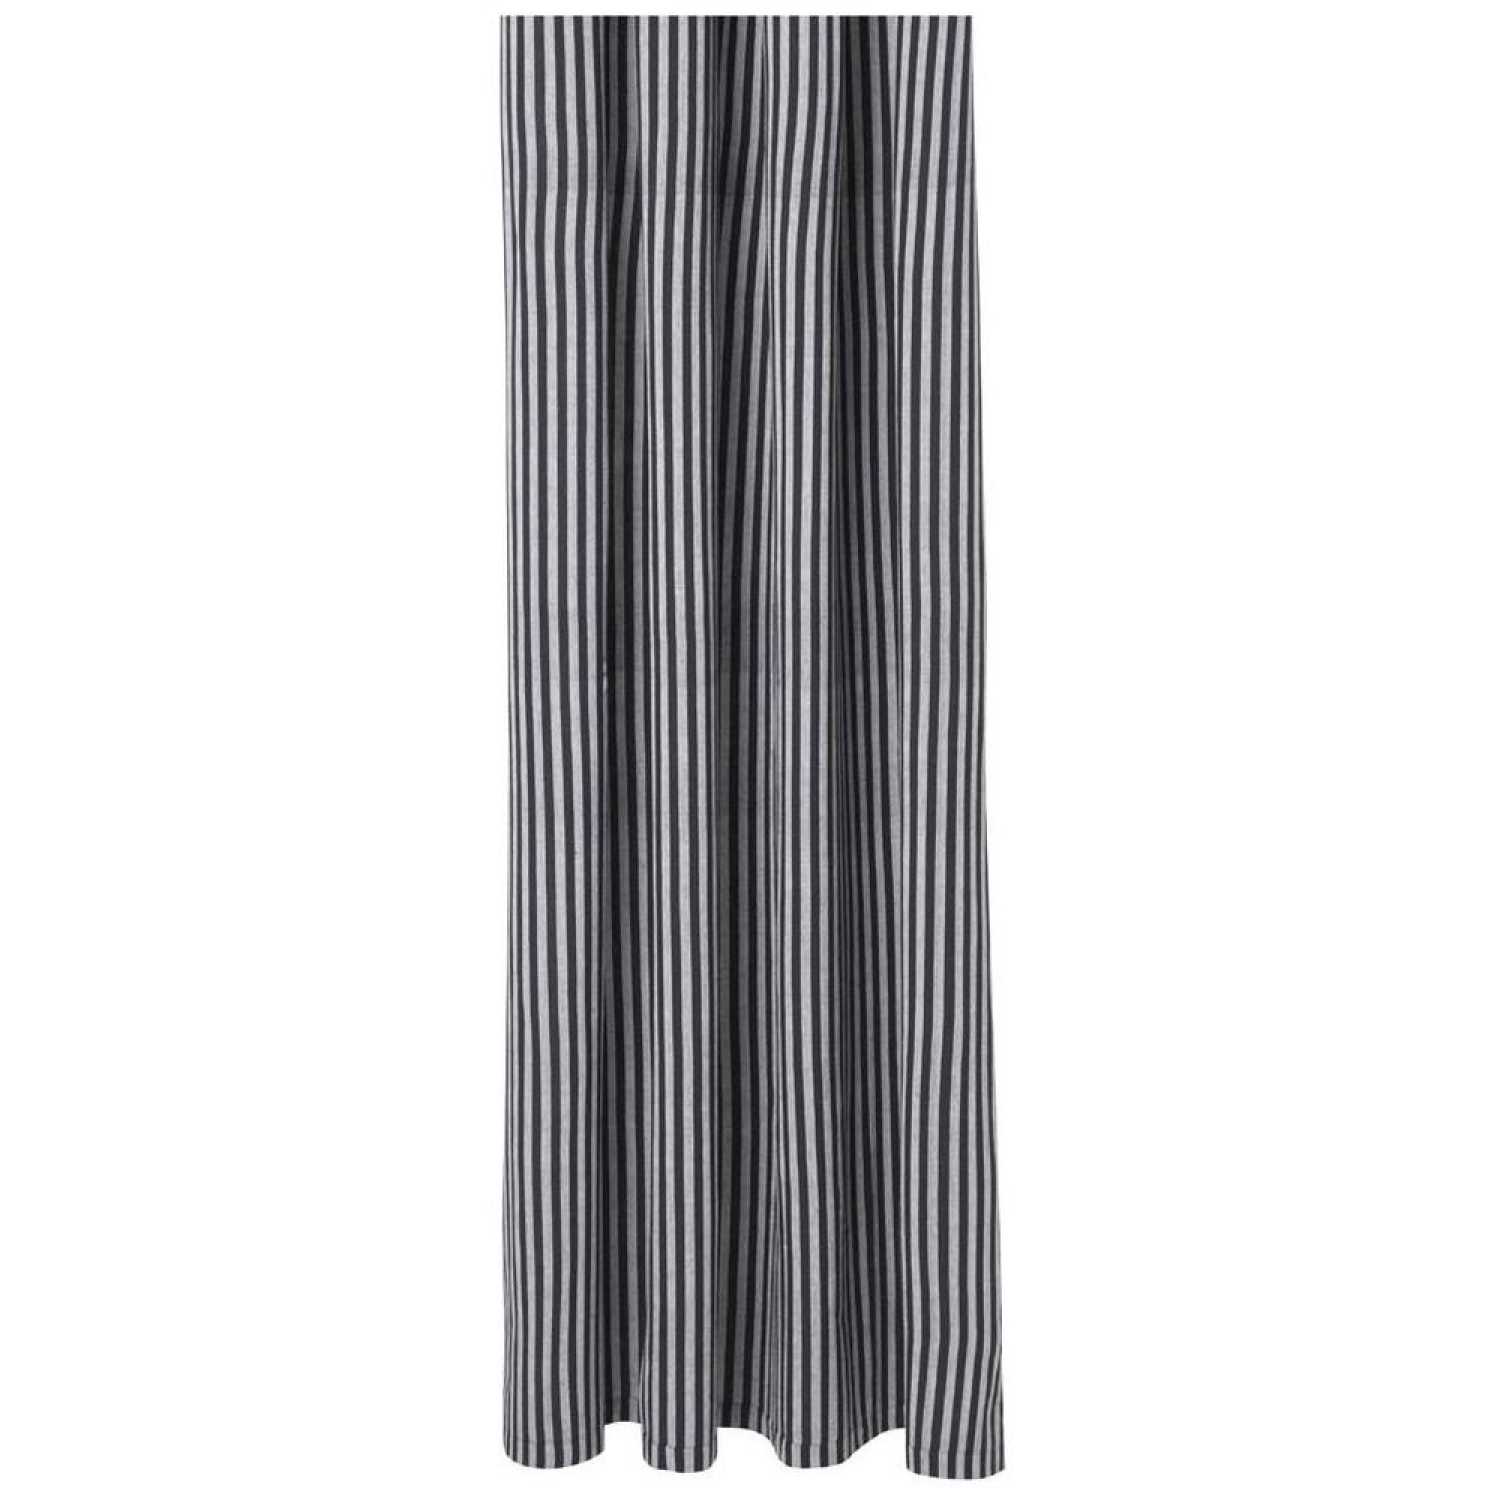 Ferm Living Chambray Shower Curtain - Striped